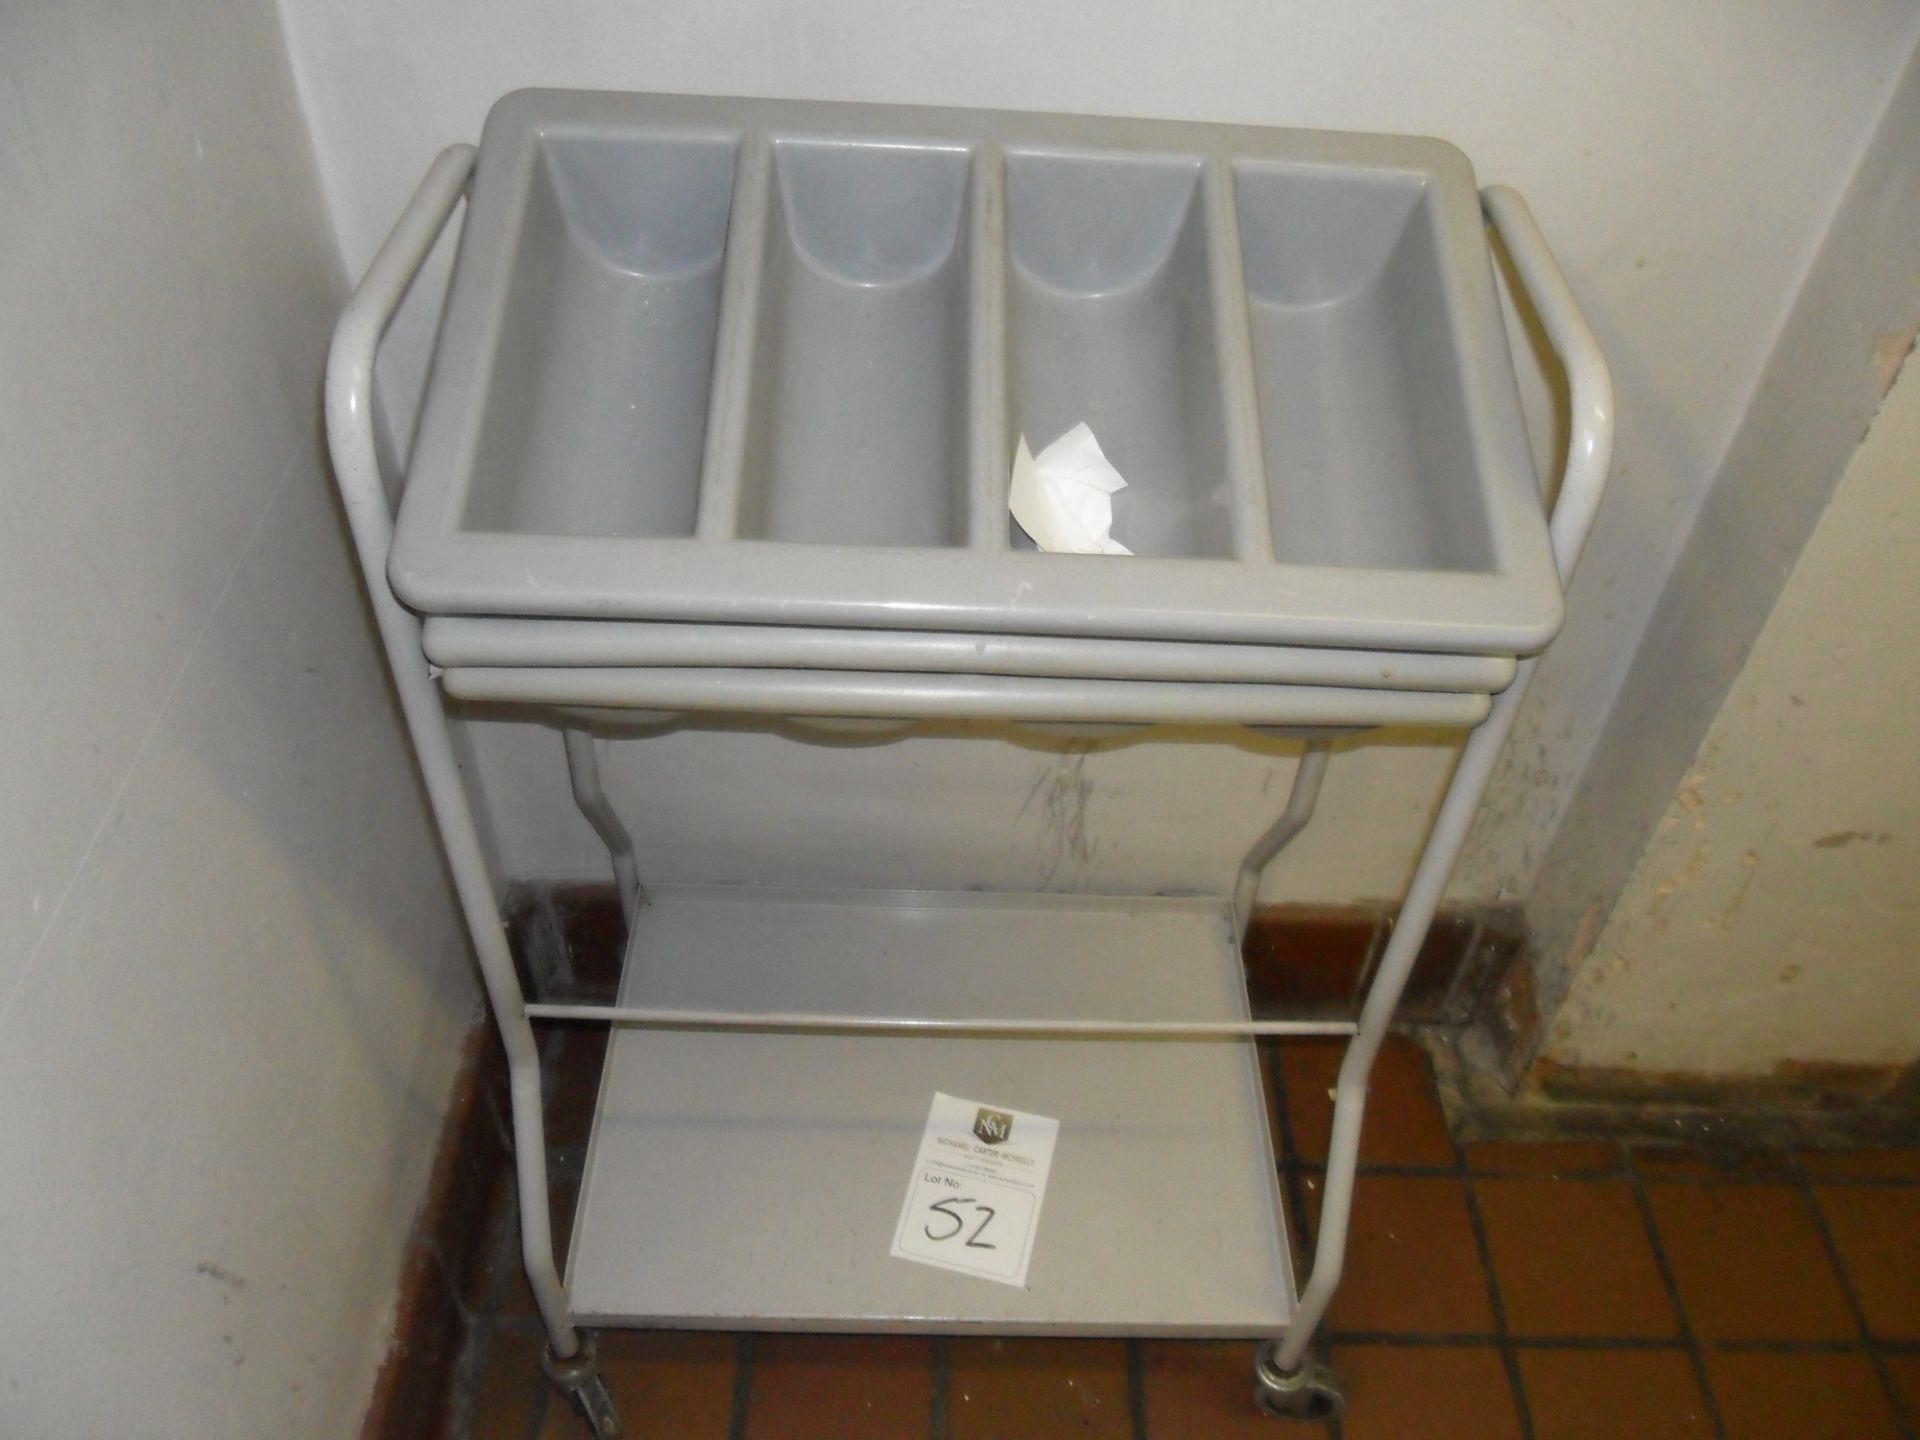 Cutlery tray rack on castors, includes 3 cutlery sections in grey.